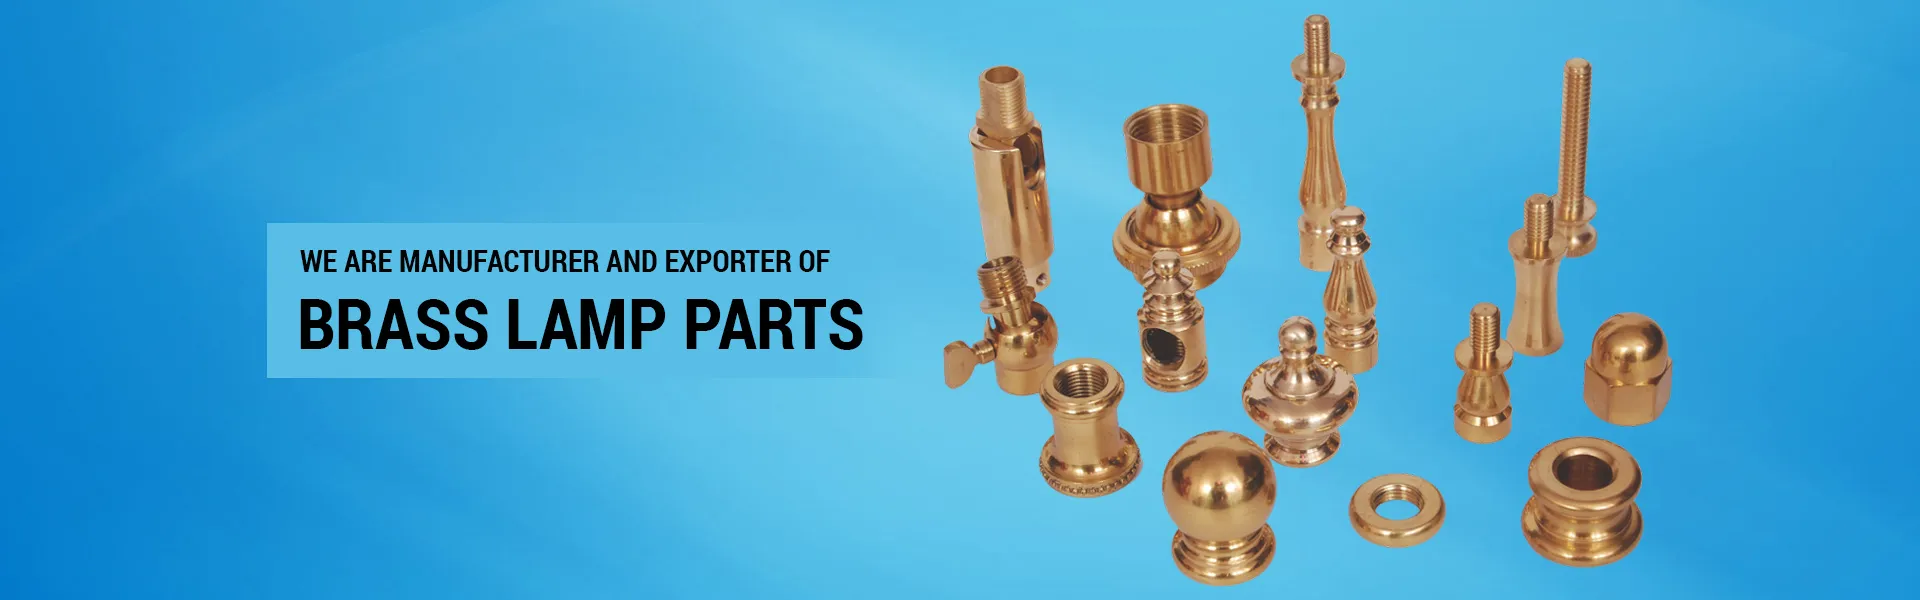 Brass Components Manufacturer & Exporter of Brass & Copper Alloy Components